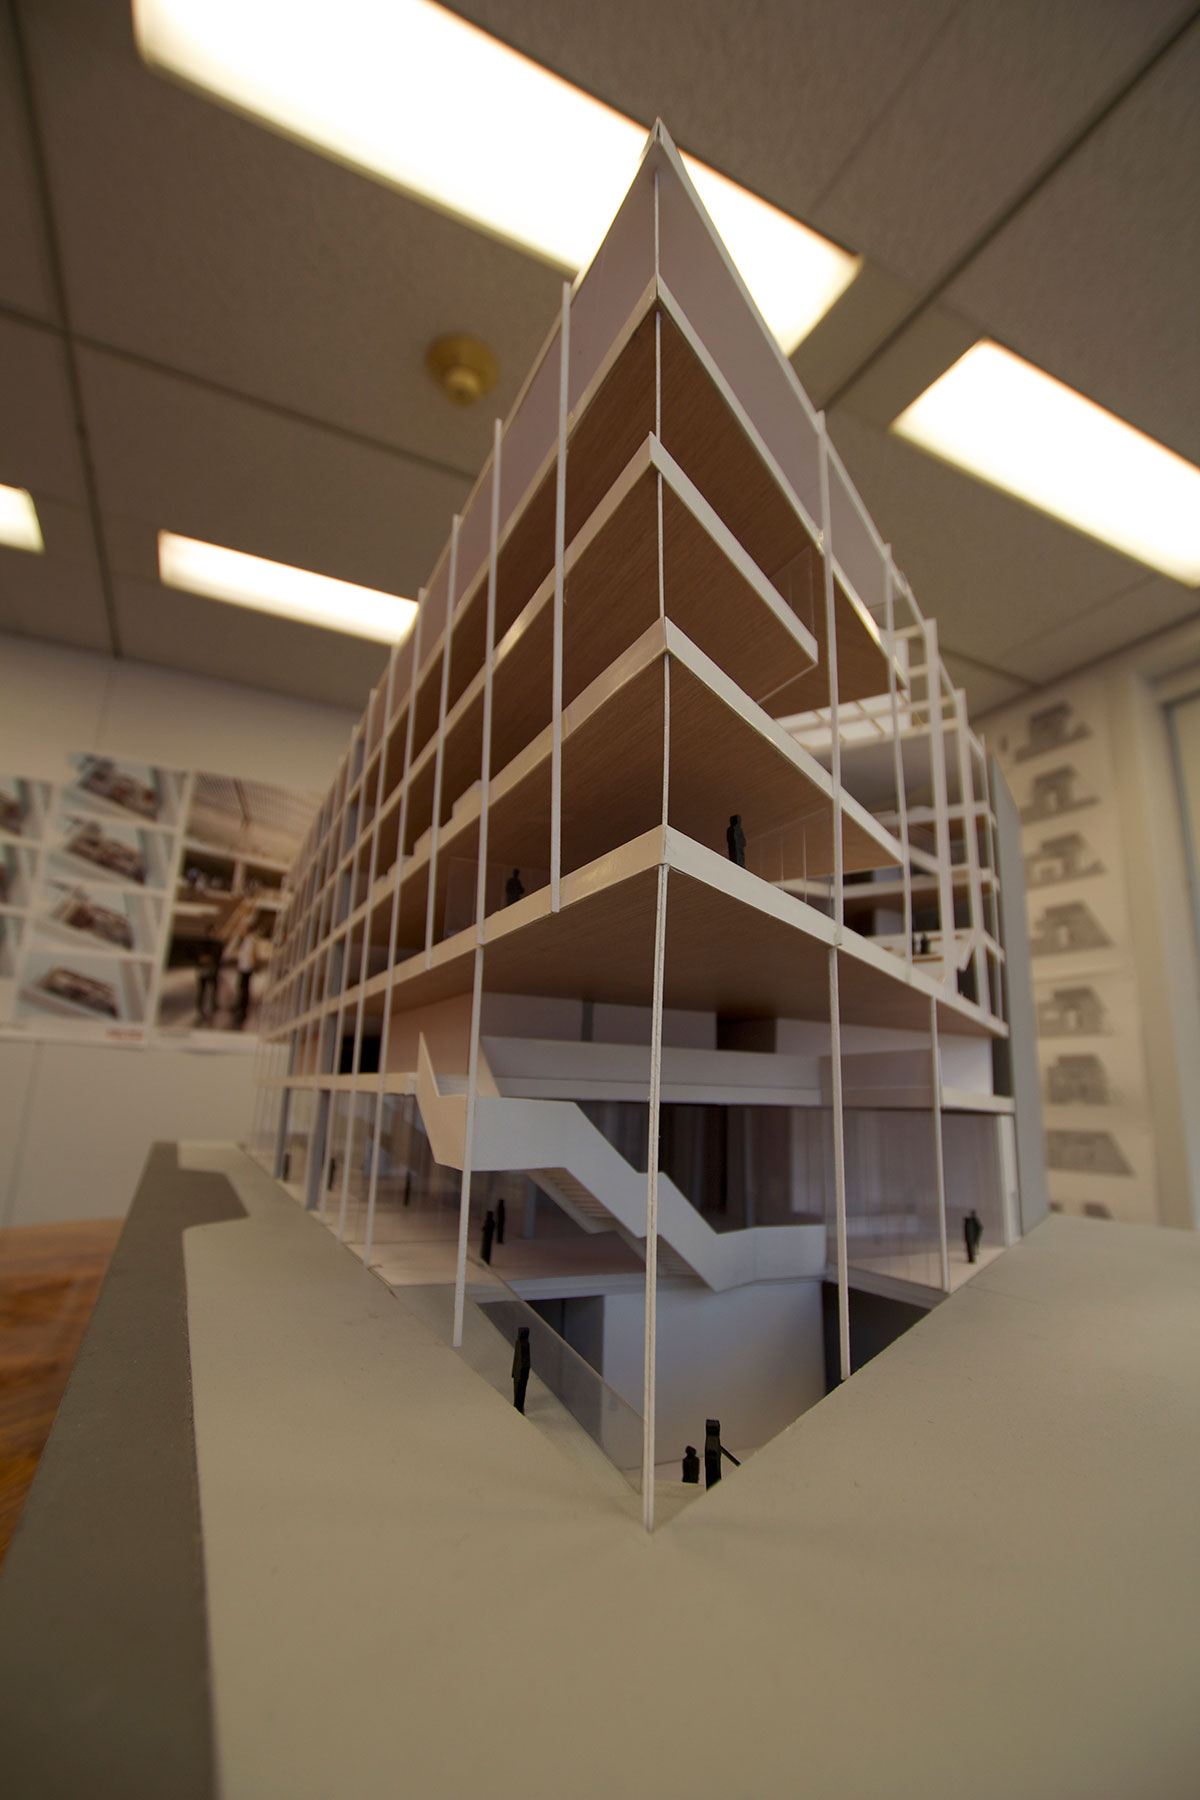 Architectural model of the American Bible Society project located at the Upper West Side, New York City designed by the architecture studio Danny Forster & Architecture